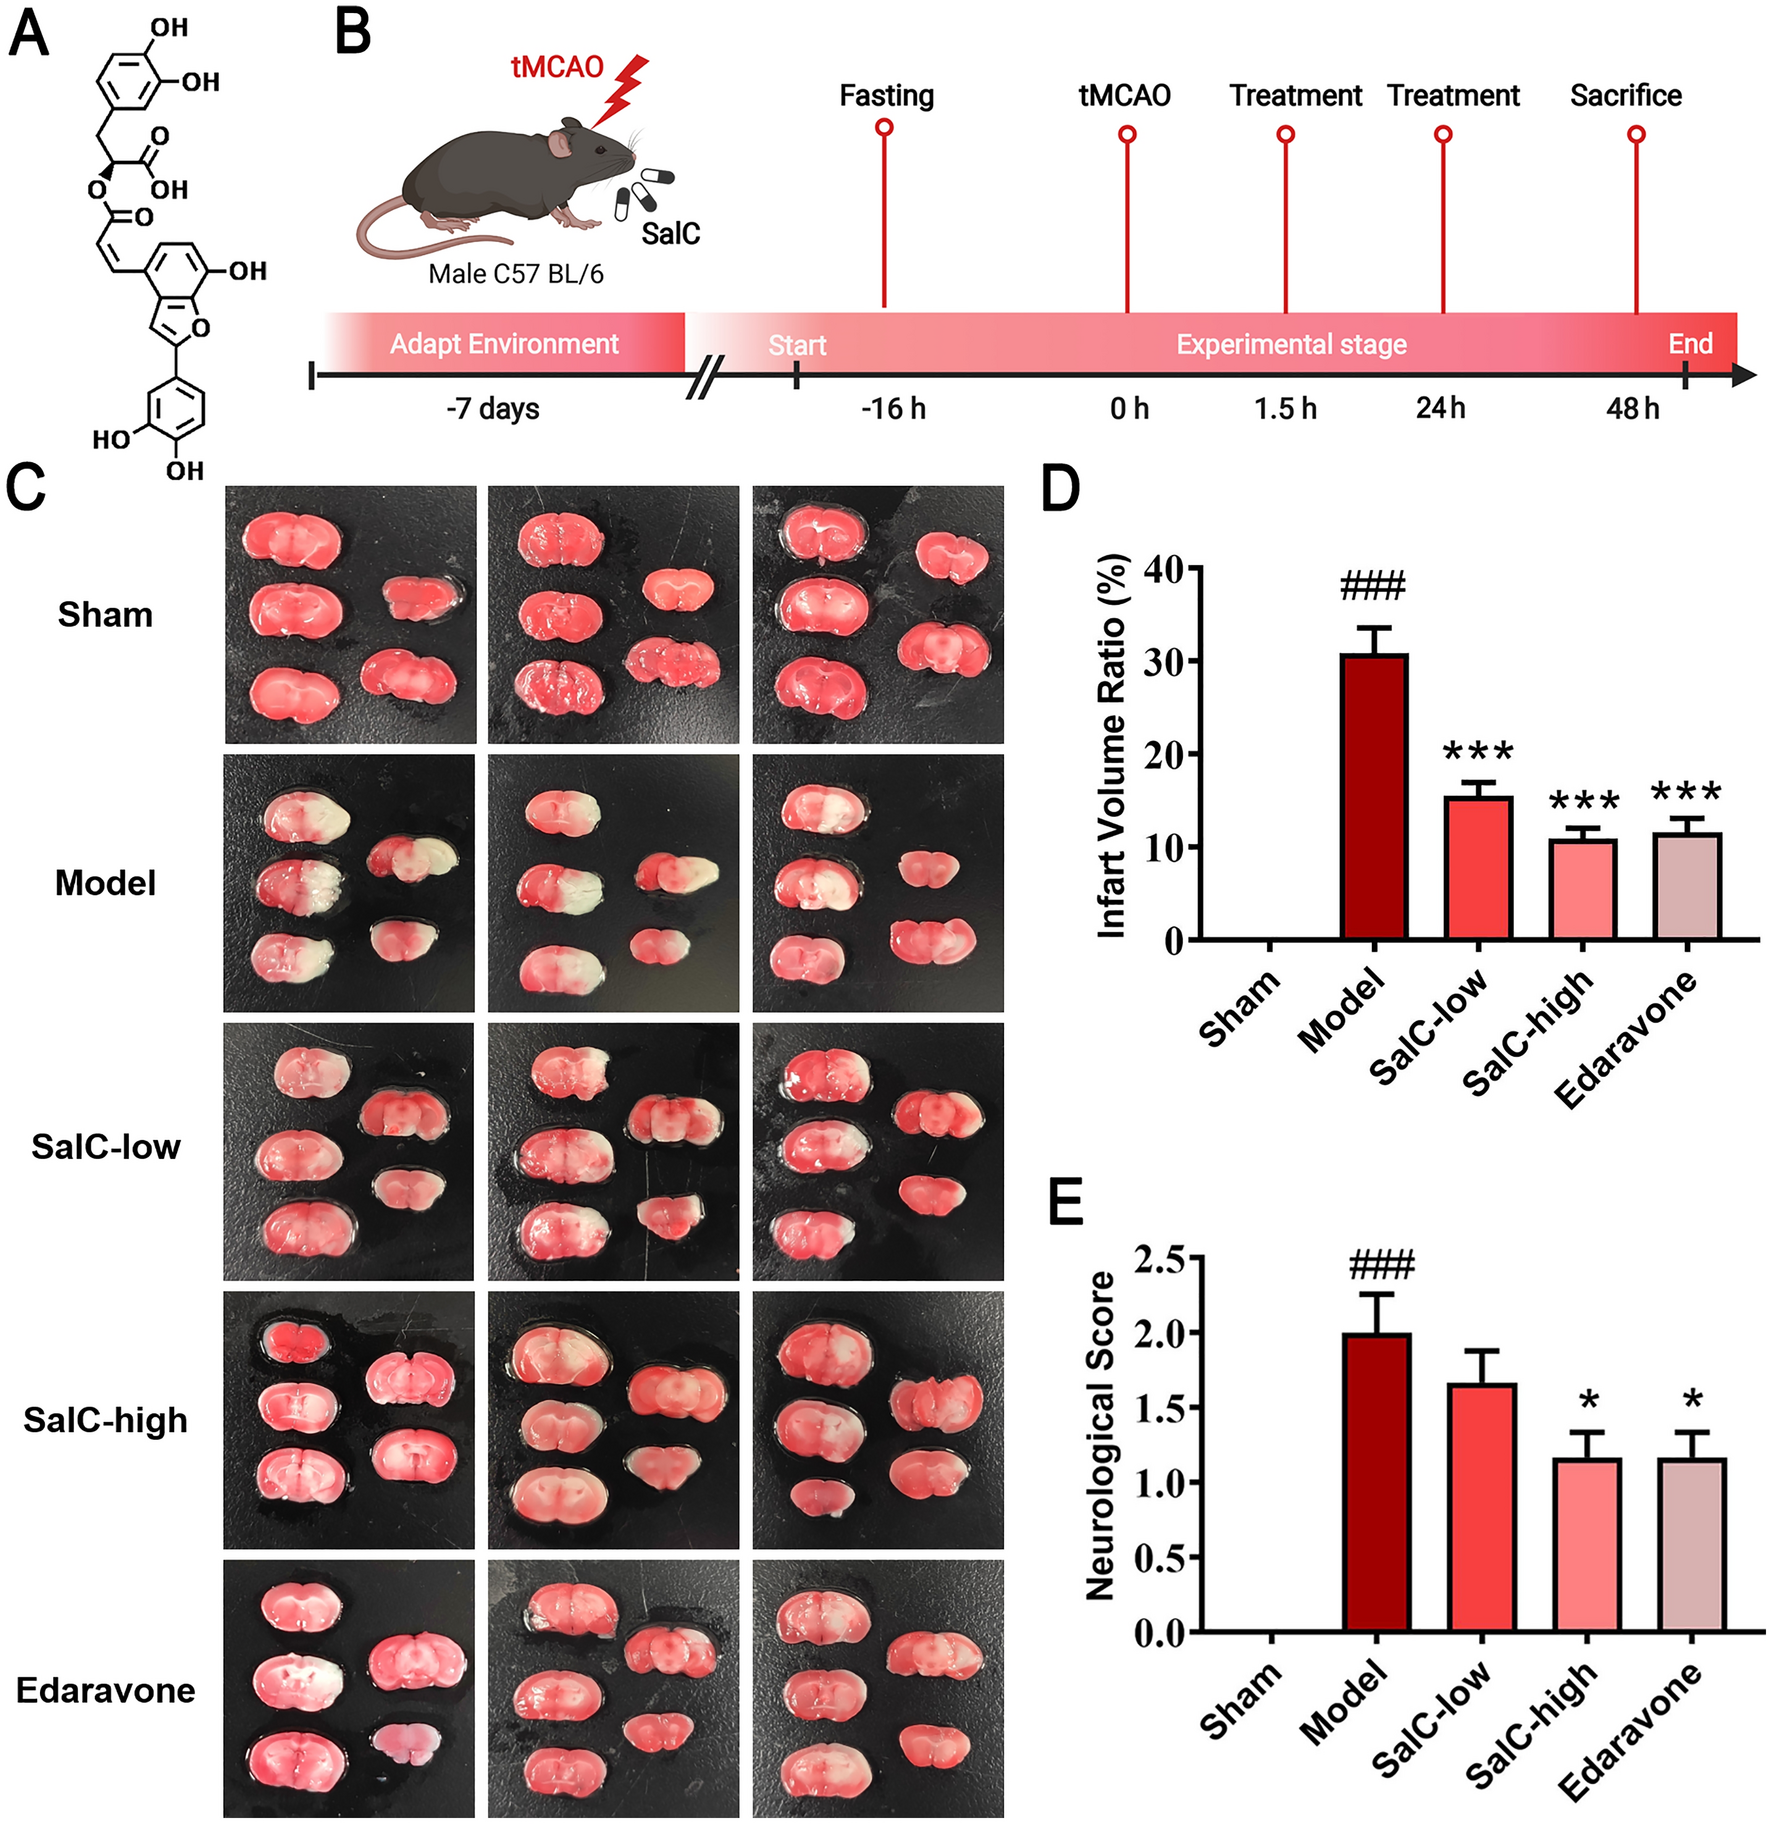 Salvianolic acid C attenuates cerebral ischemic injury through inhibiting neuroinflammation via the TLR4-TREM1-NF-κB pathway